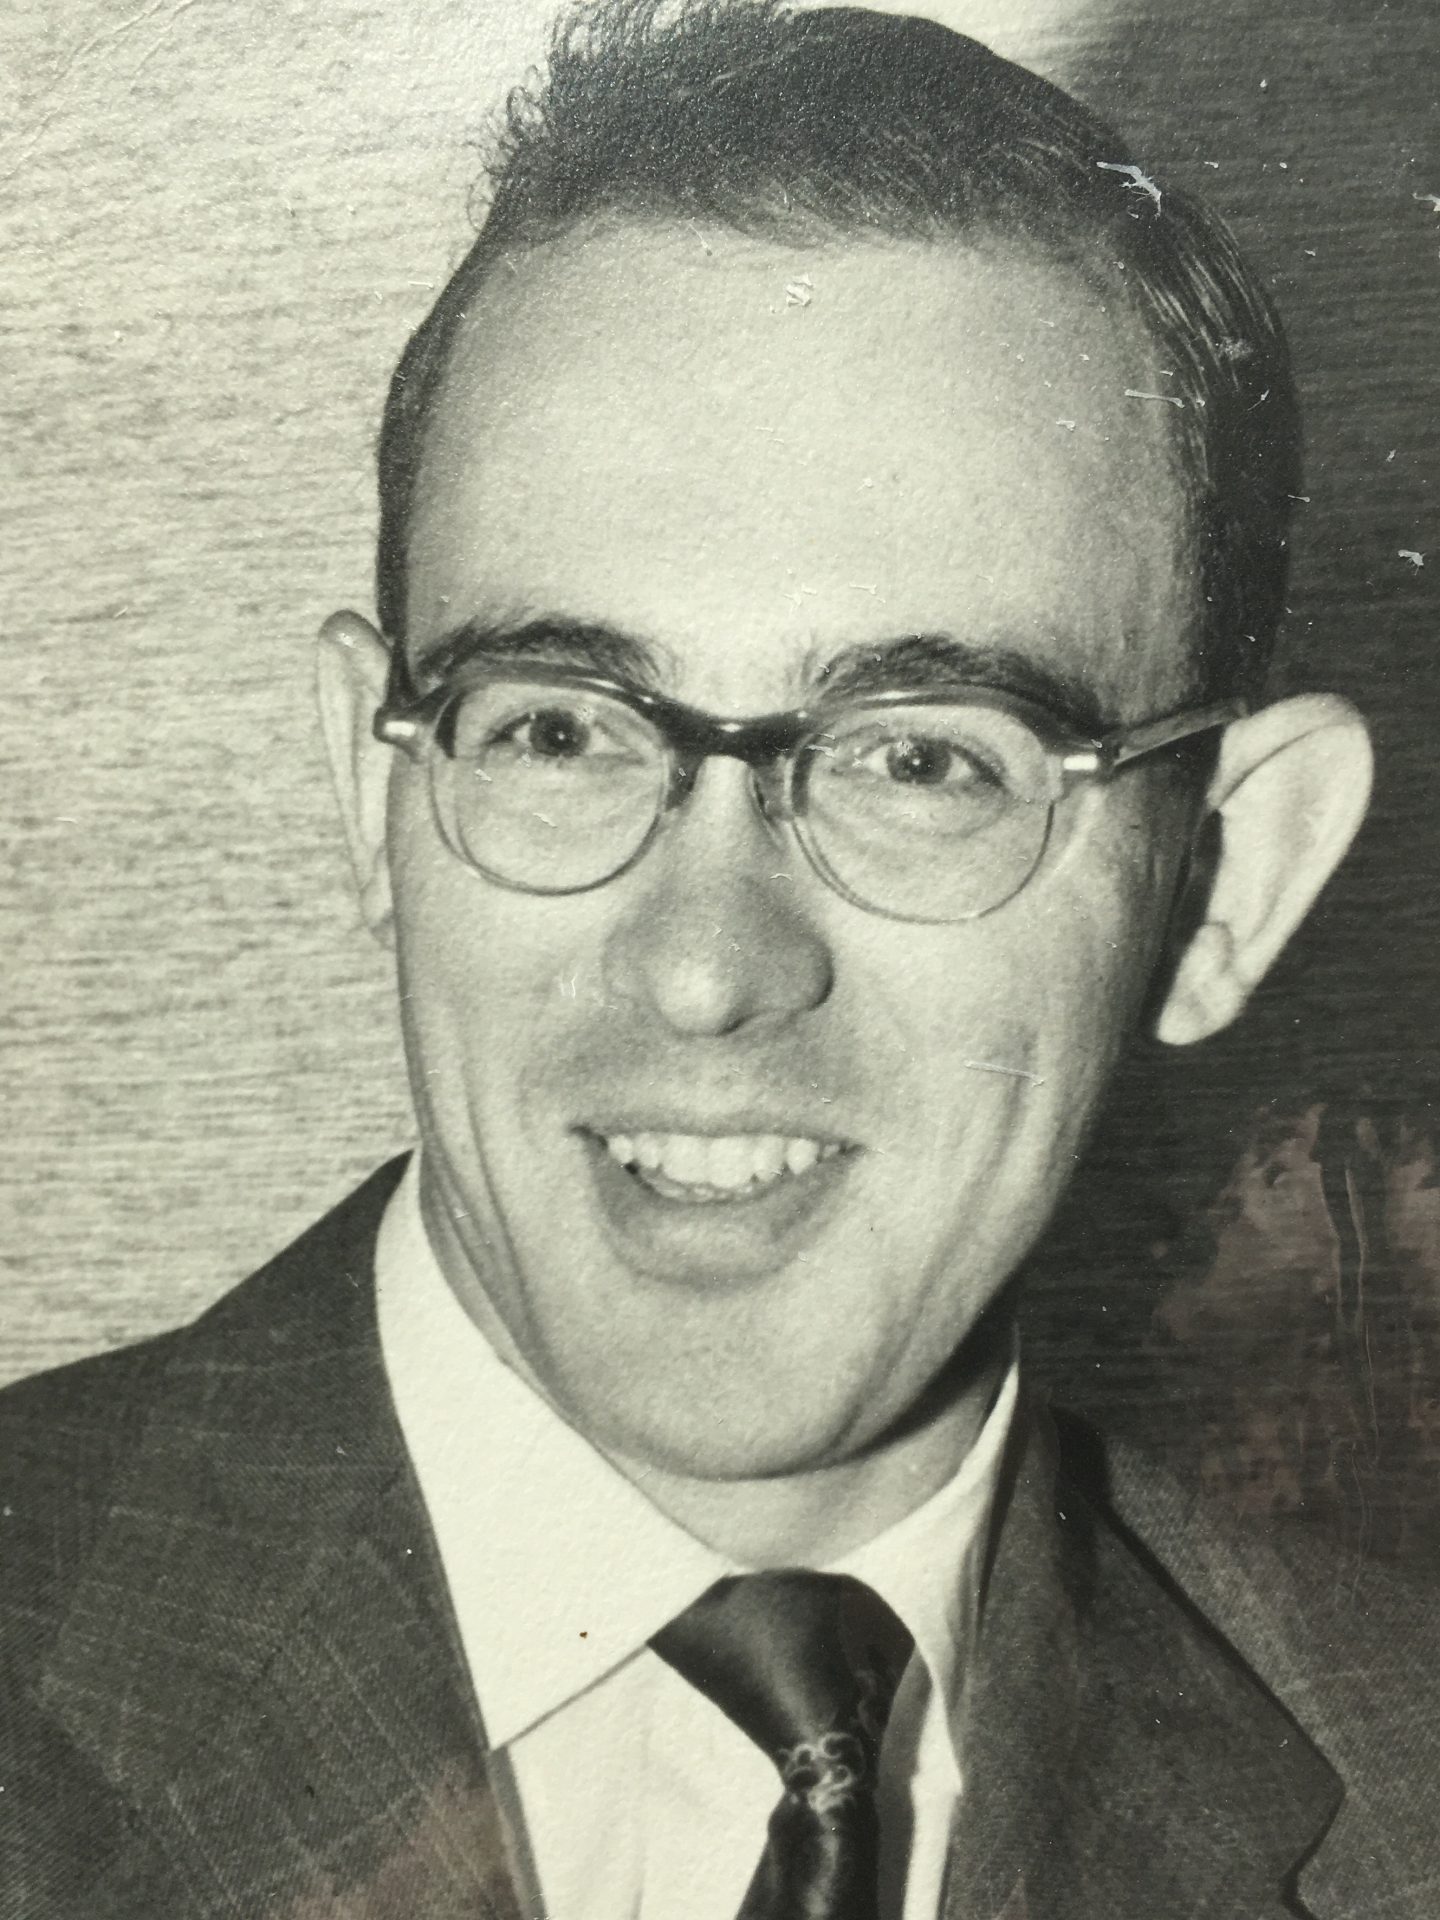 Dick as a young lawyer in the 1950s